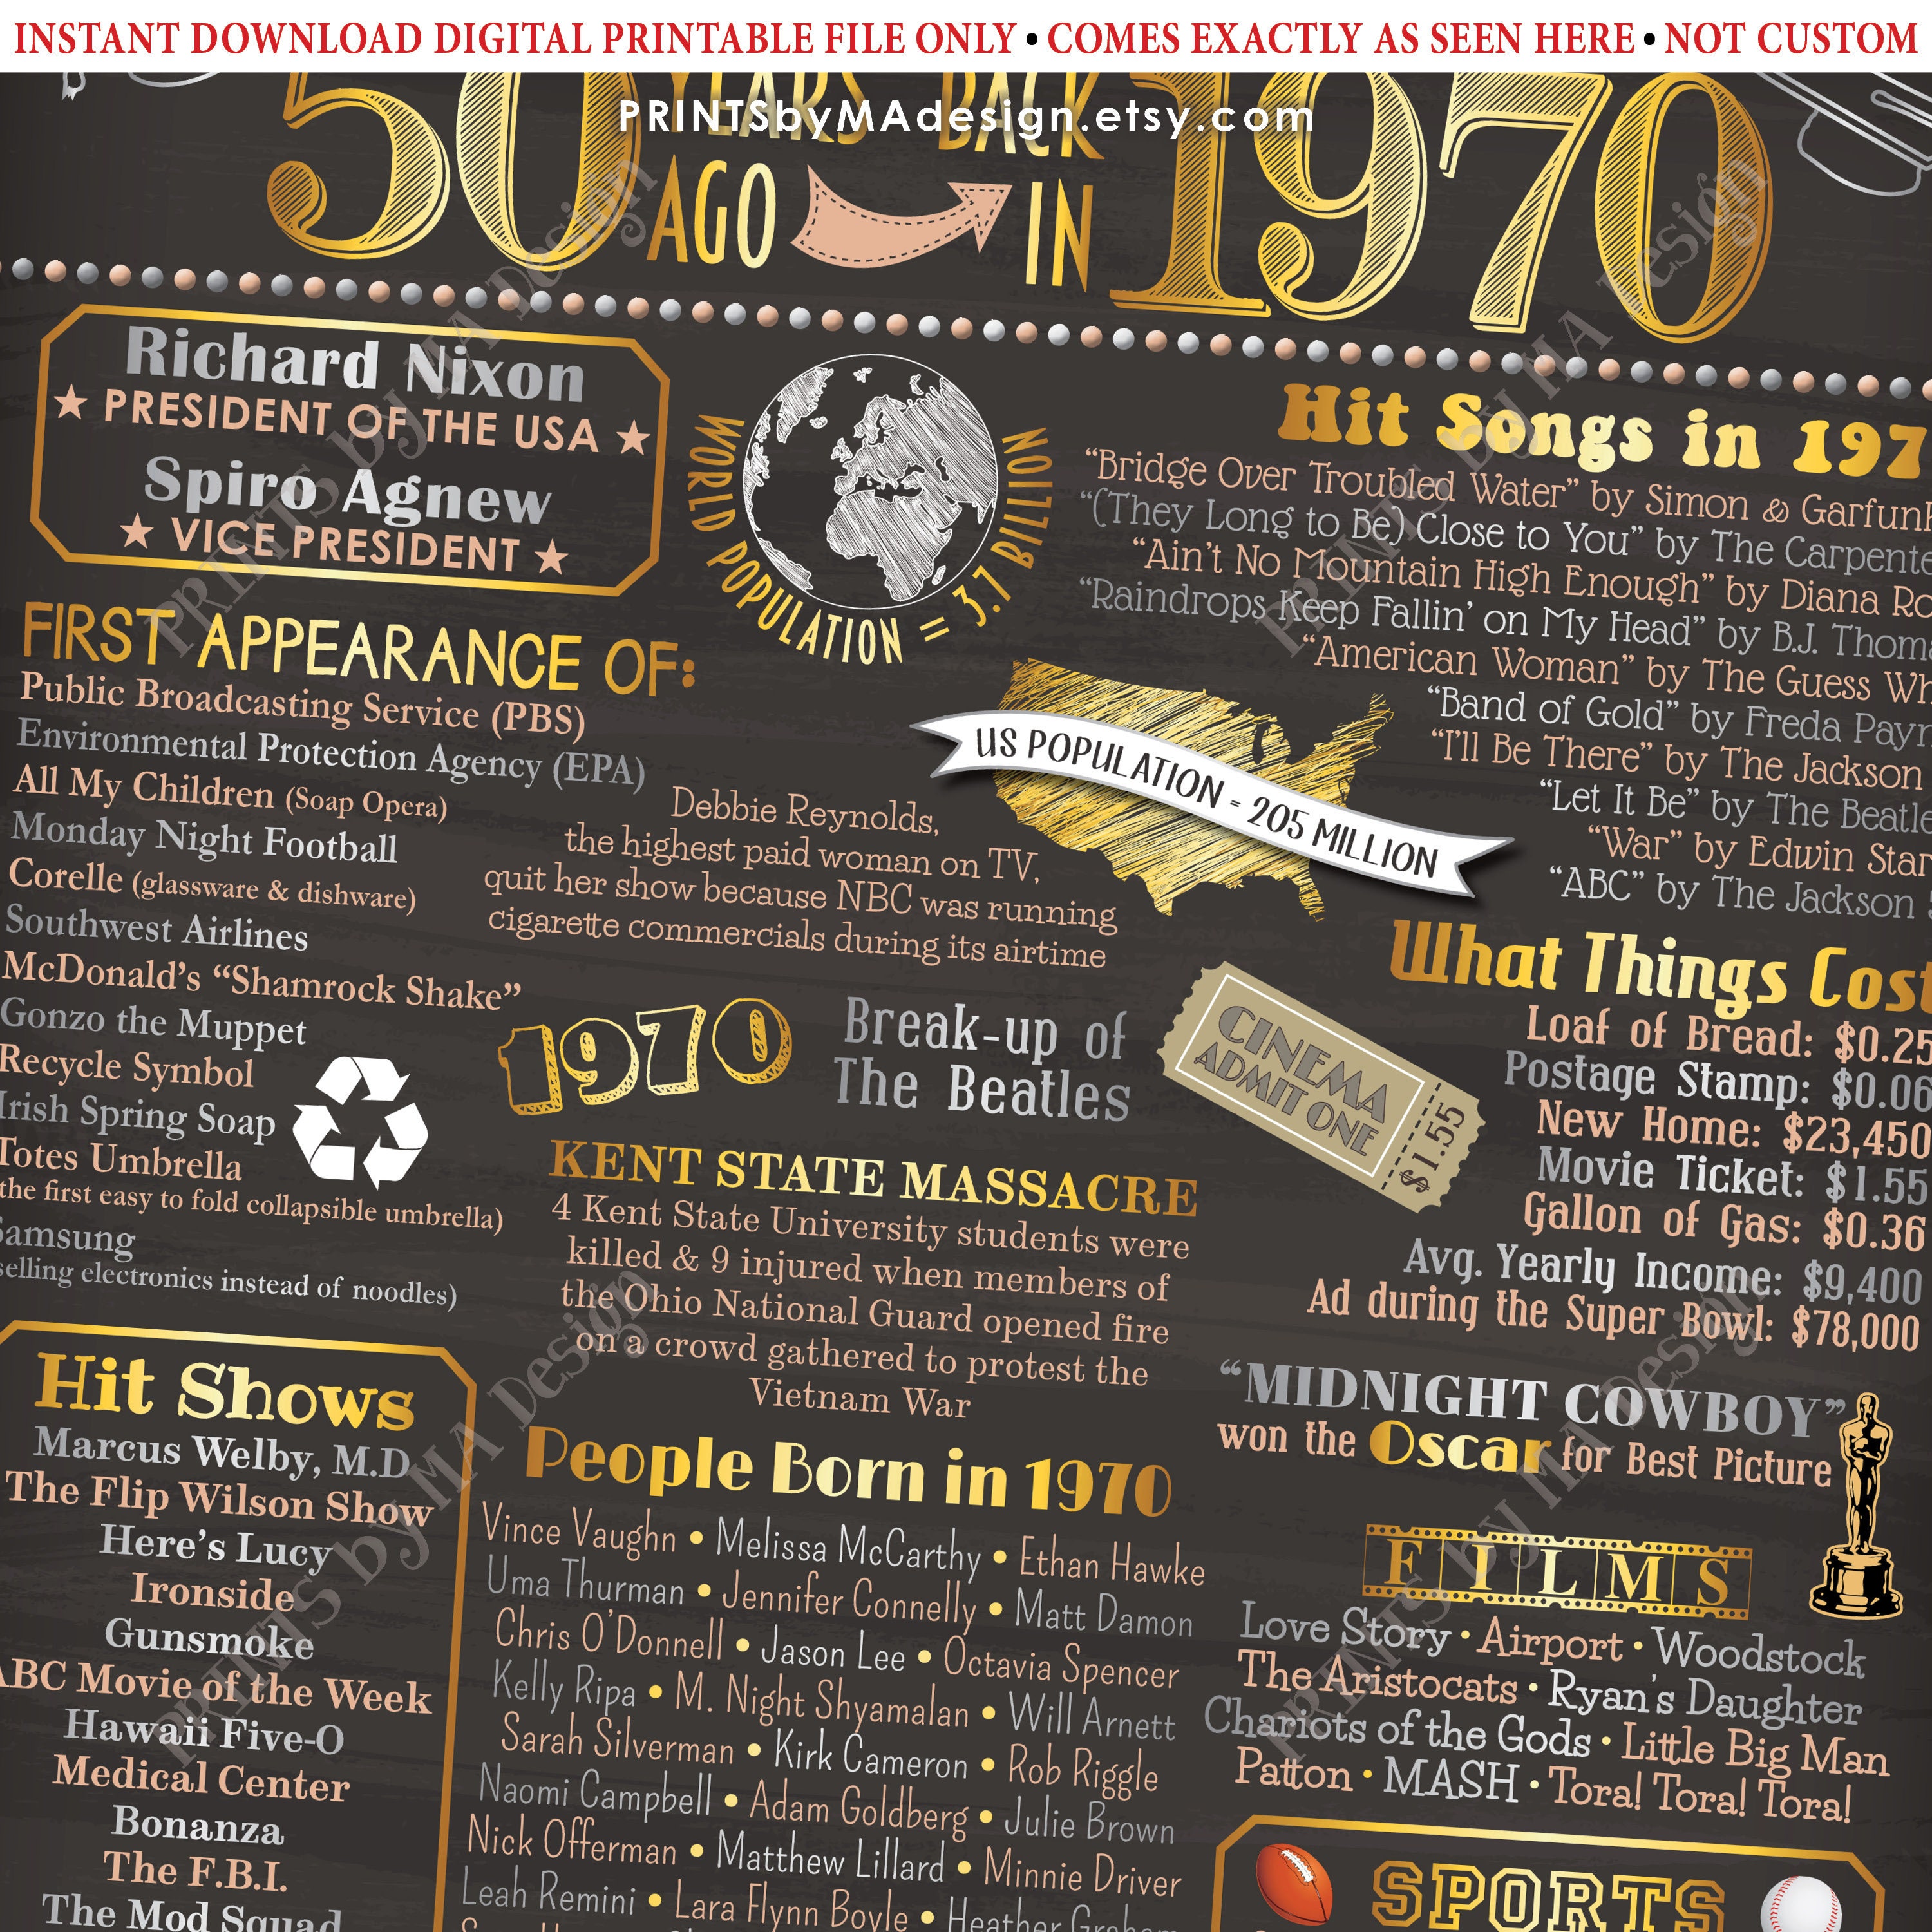 50th Class Reunion Poster Board Class Of 1970 Flashback Printable